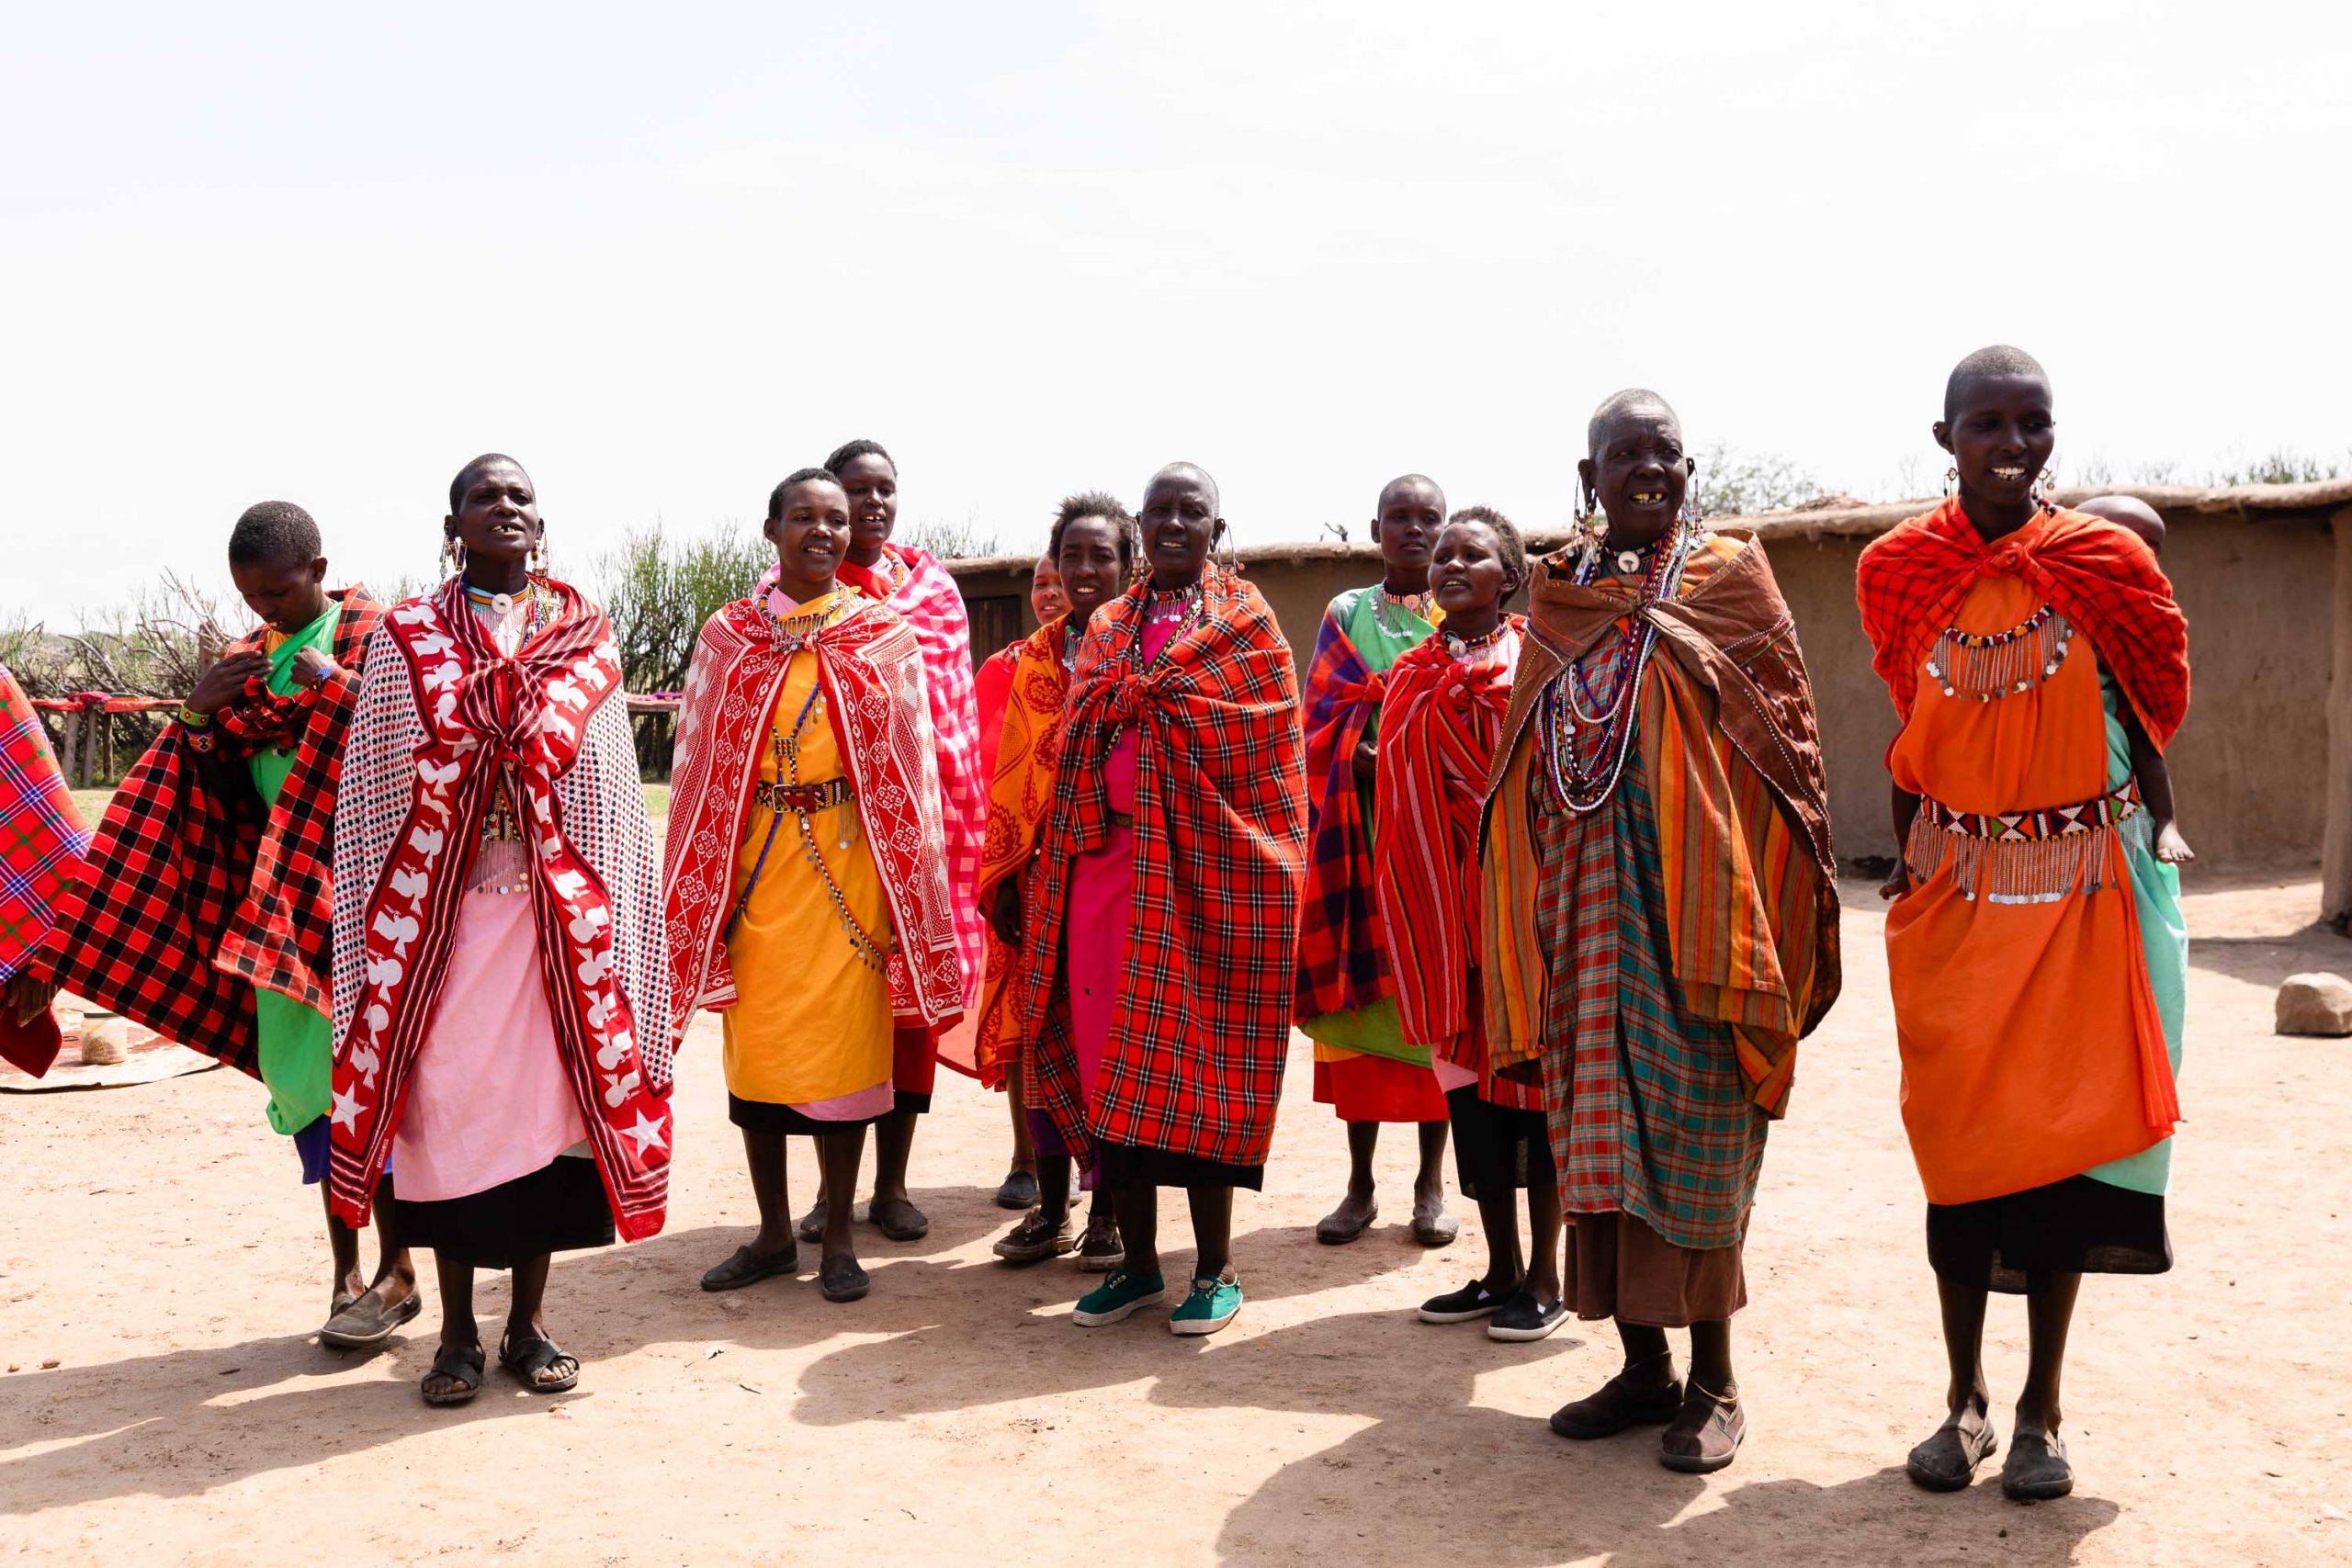 How girls' education intersects with Maasai culture in Kenya